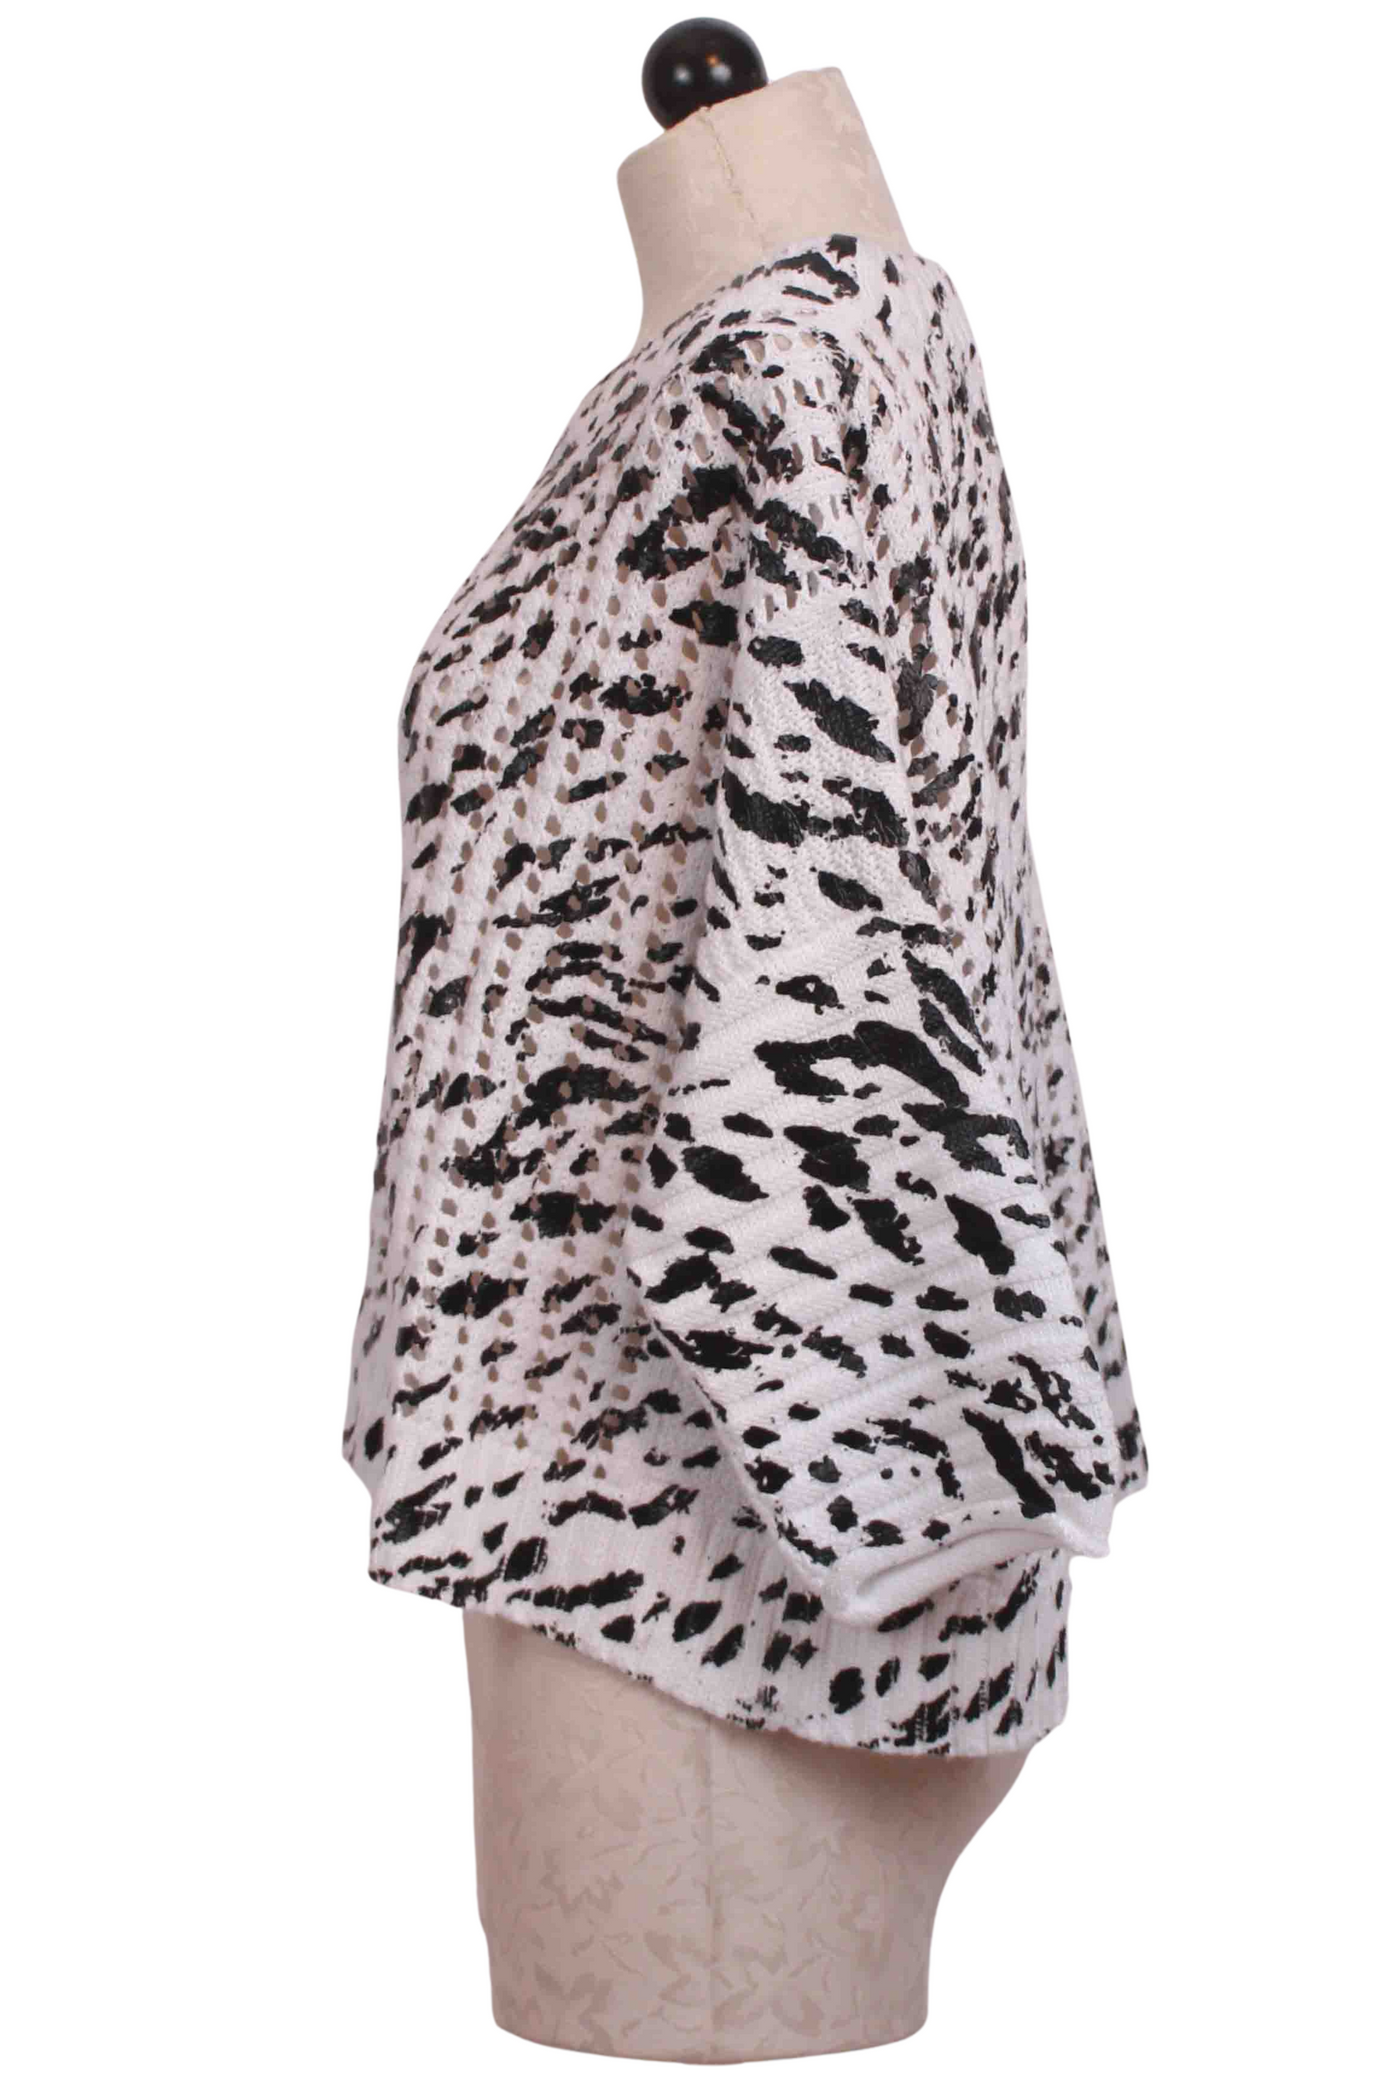 side view of Black and White Dalmation Boatneck Sweater by Planet